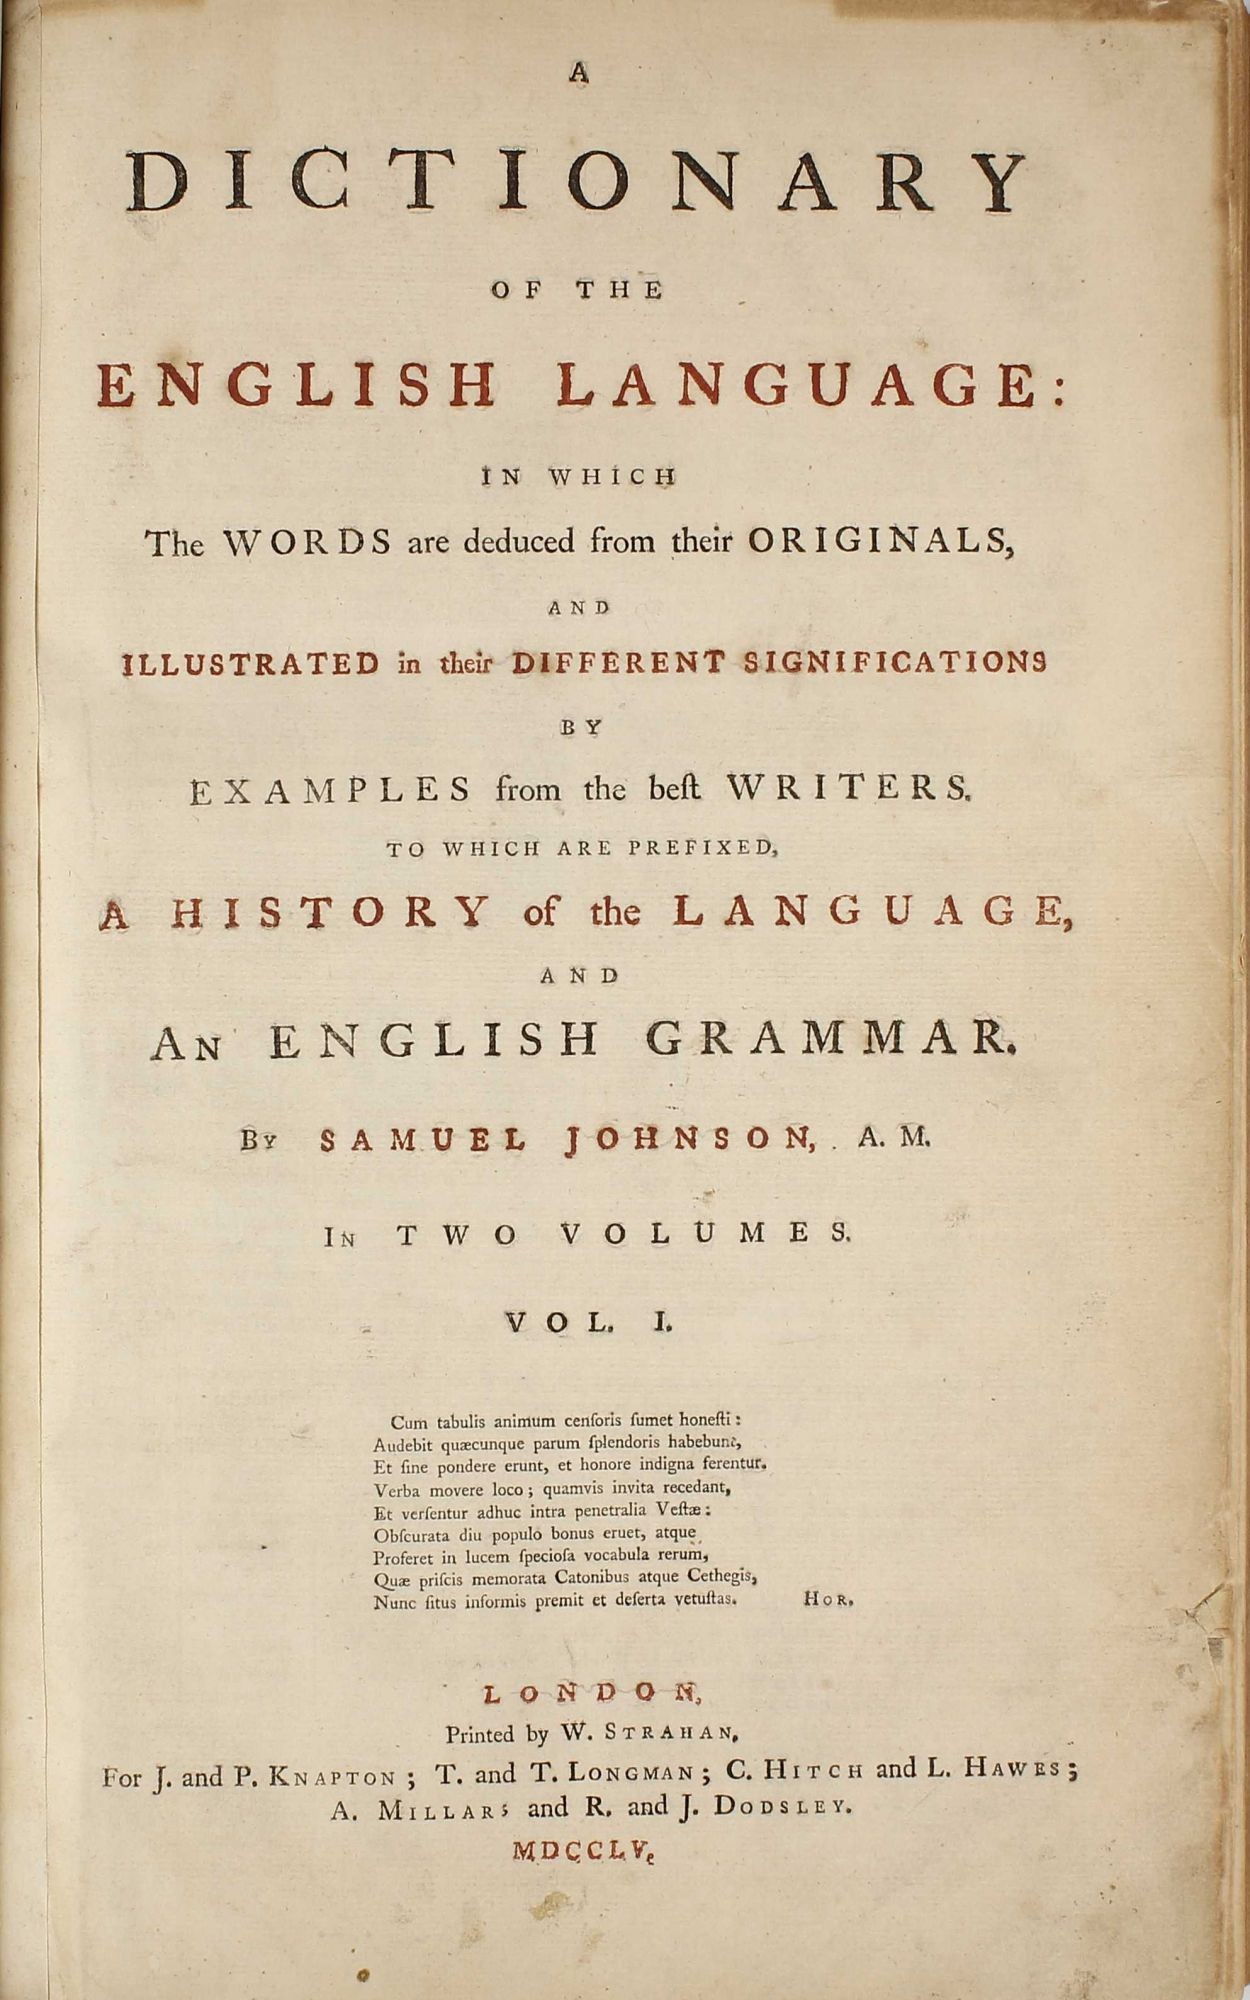 A Dictionary of the English Language: An Anthology